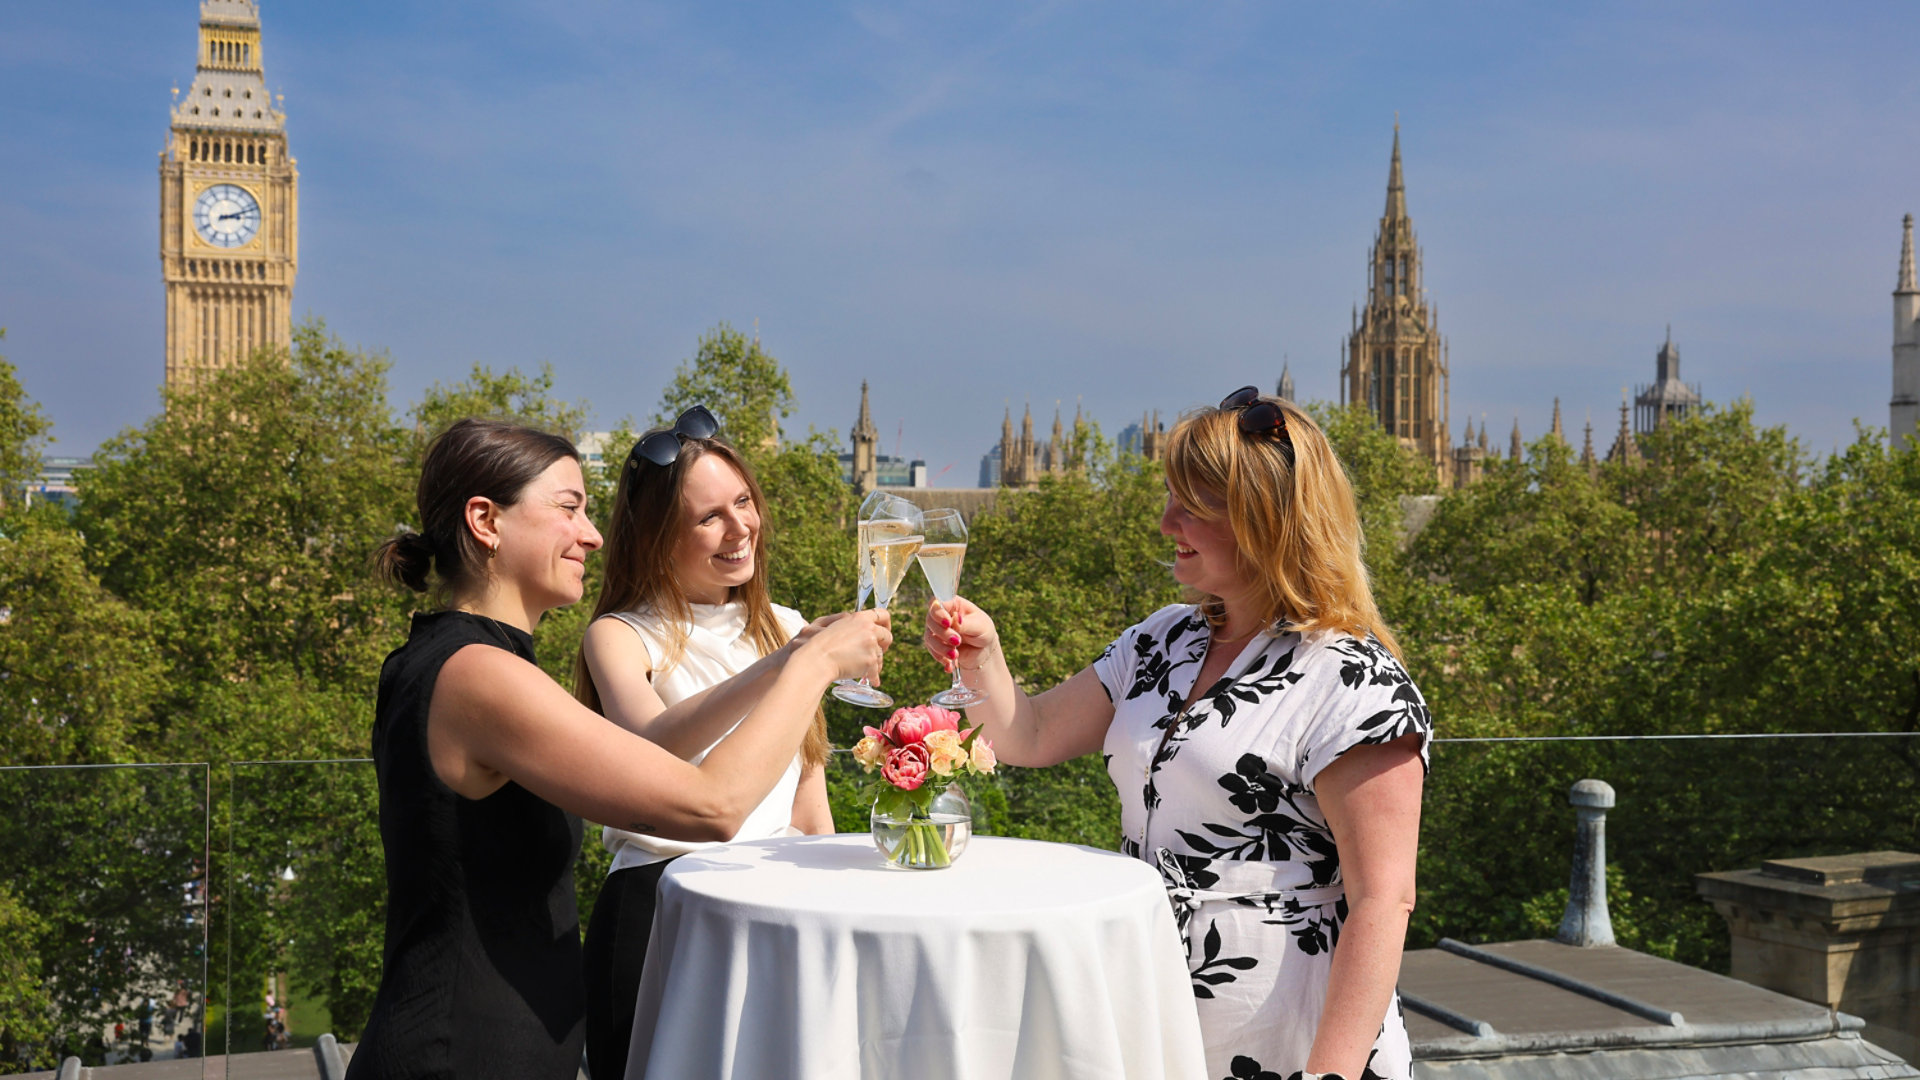 Three women raising a toast at a Surveyors House event in Westminster, London